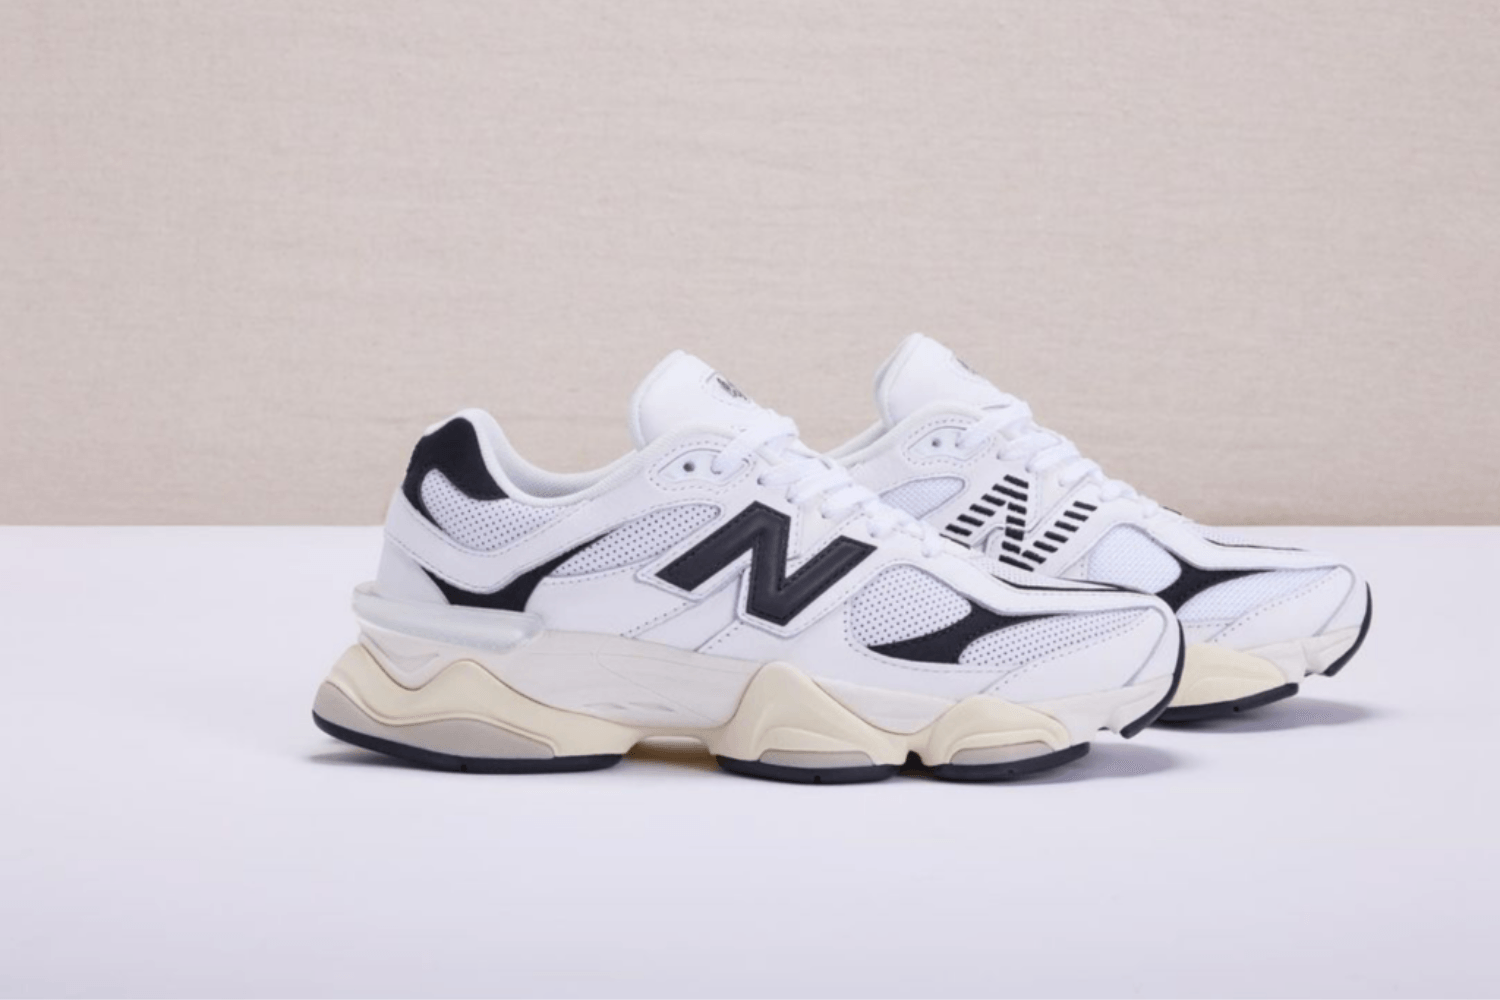 The latest trend styles from New Balance